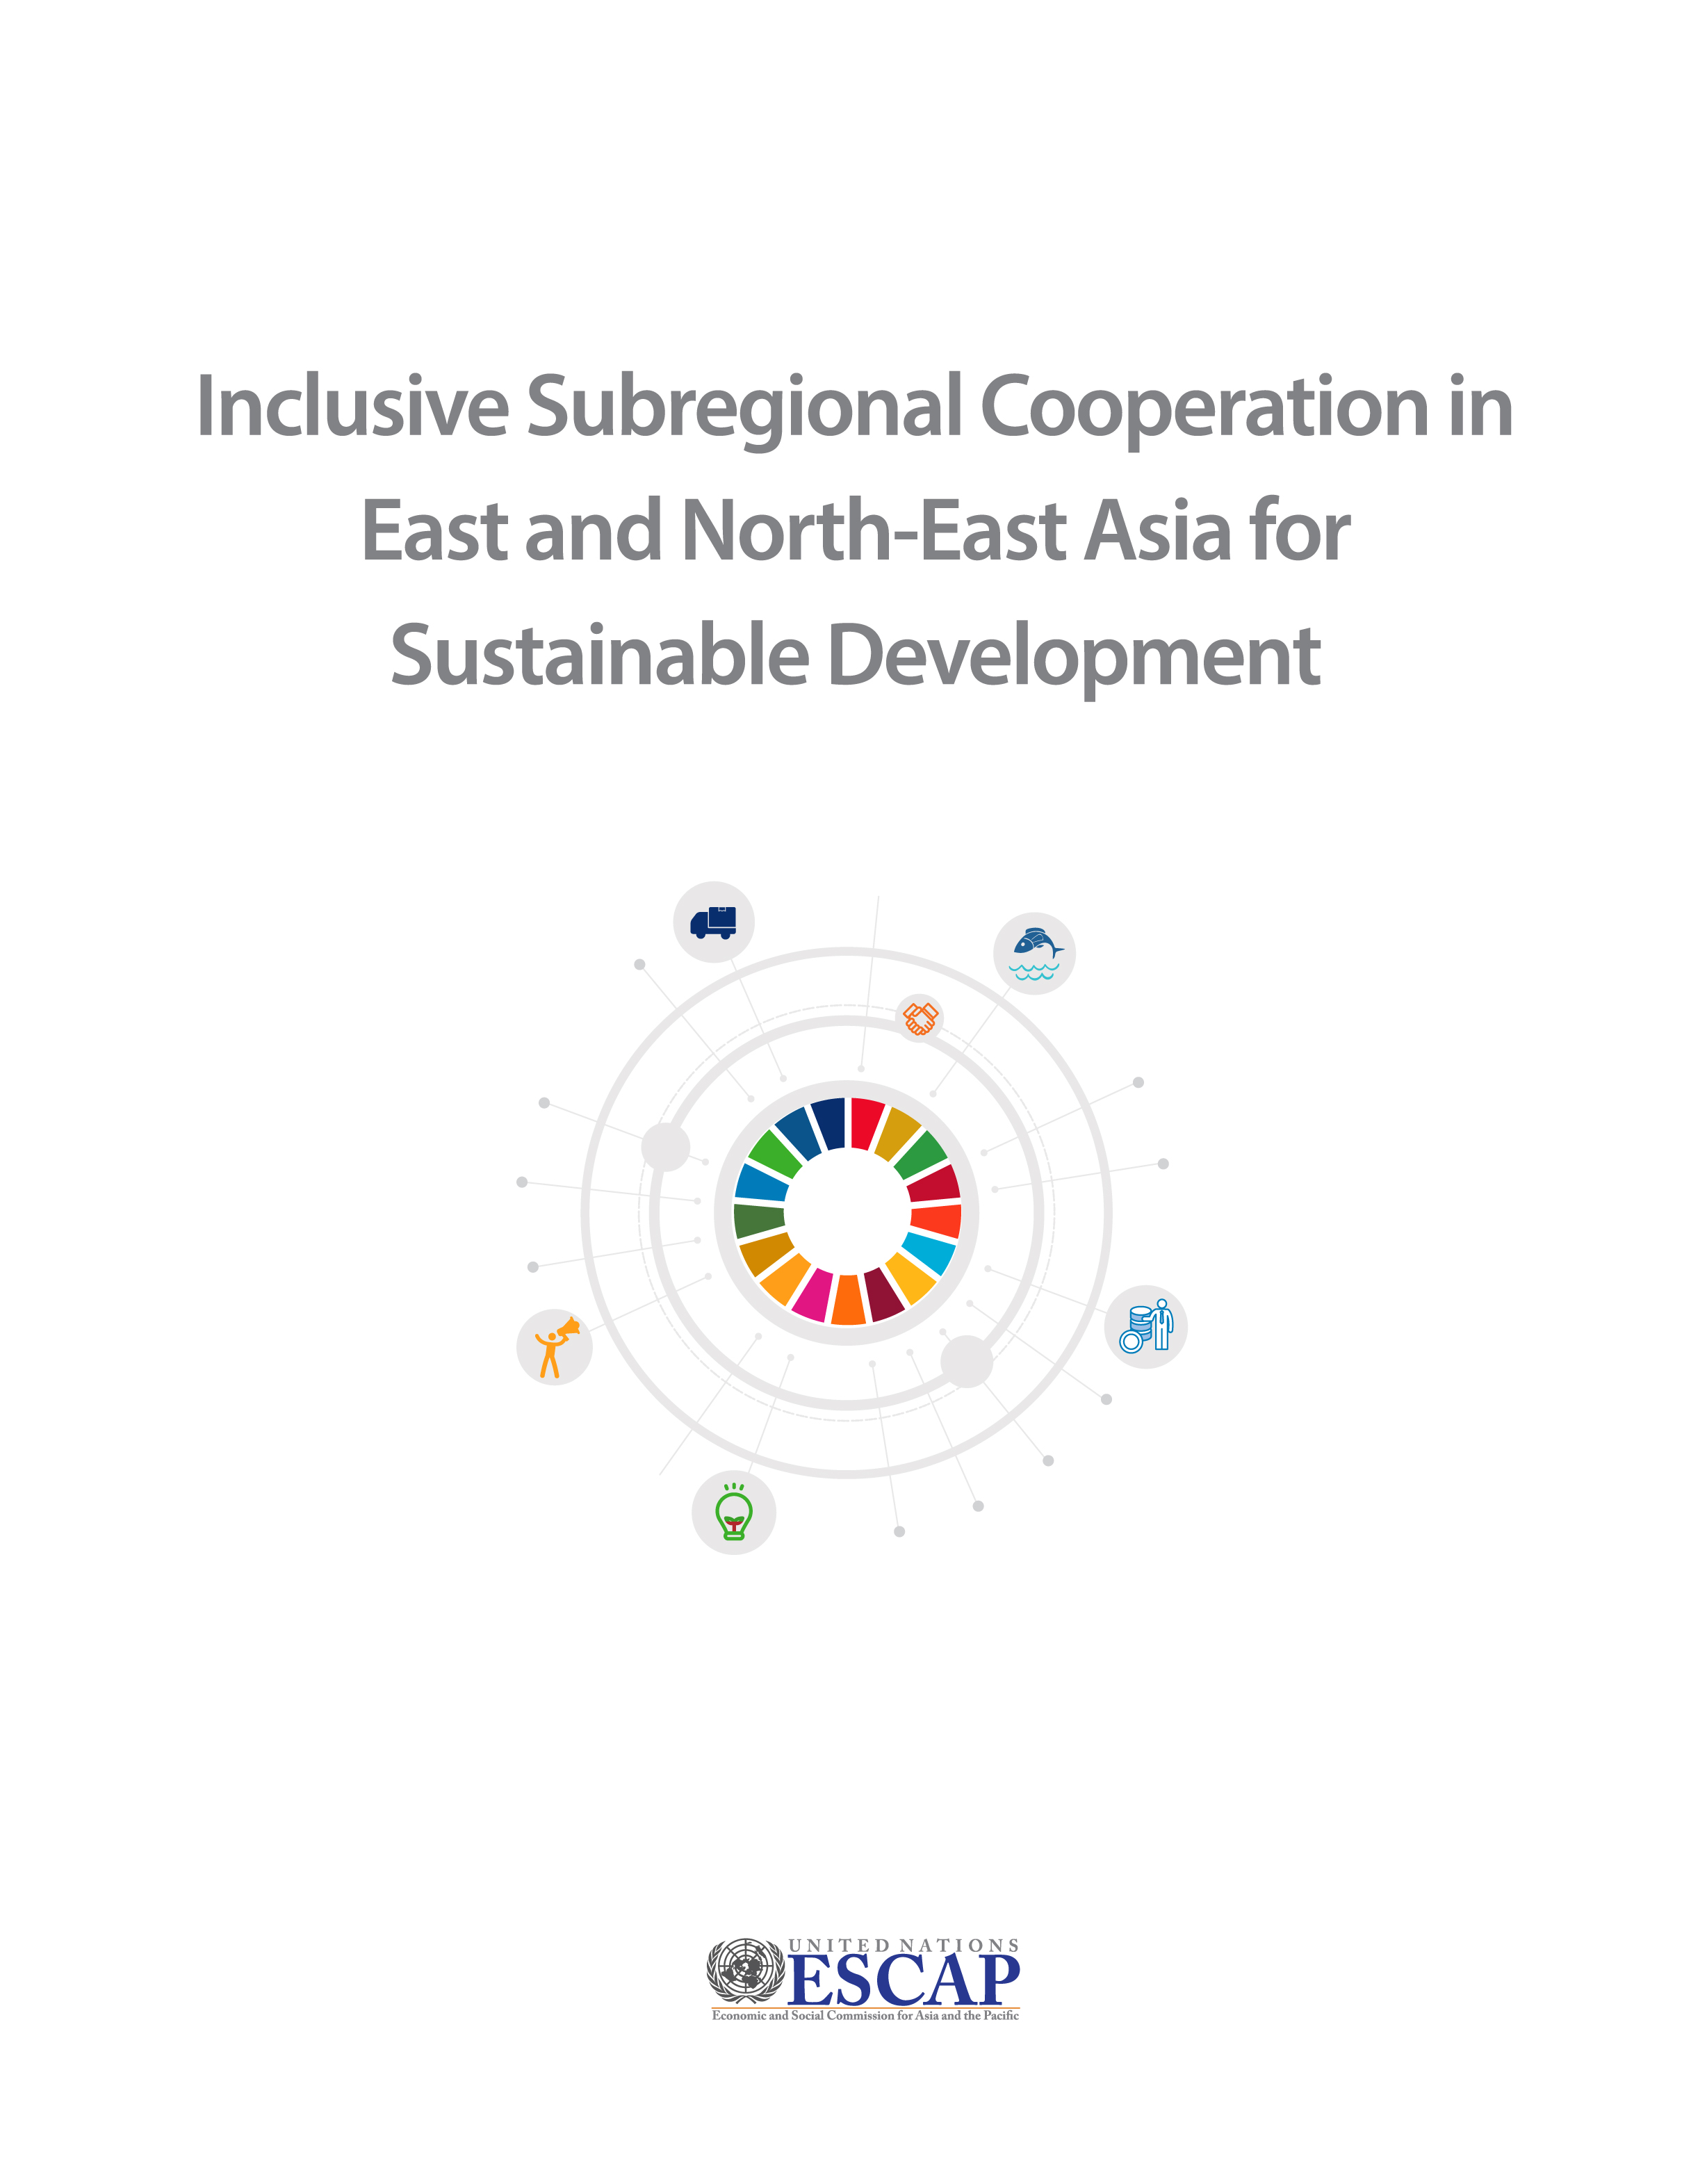 image of Inclusive Subregional Cooperation in East and North-East Asia for Sustainable Development